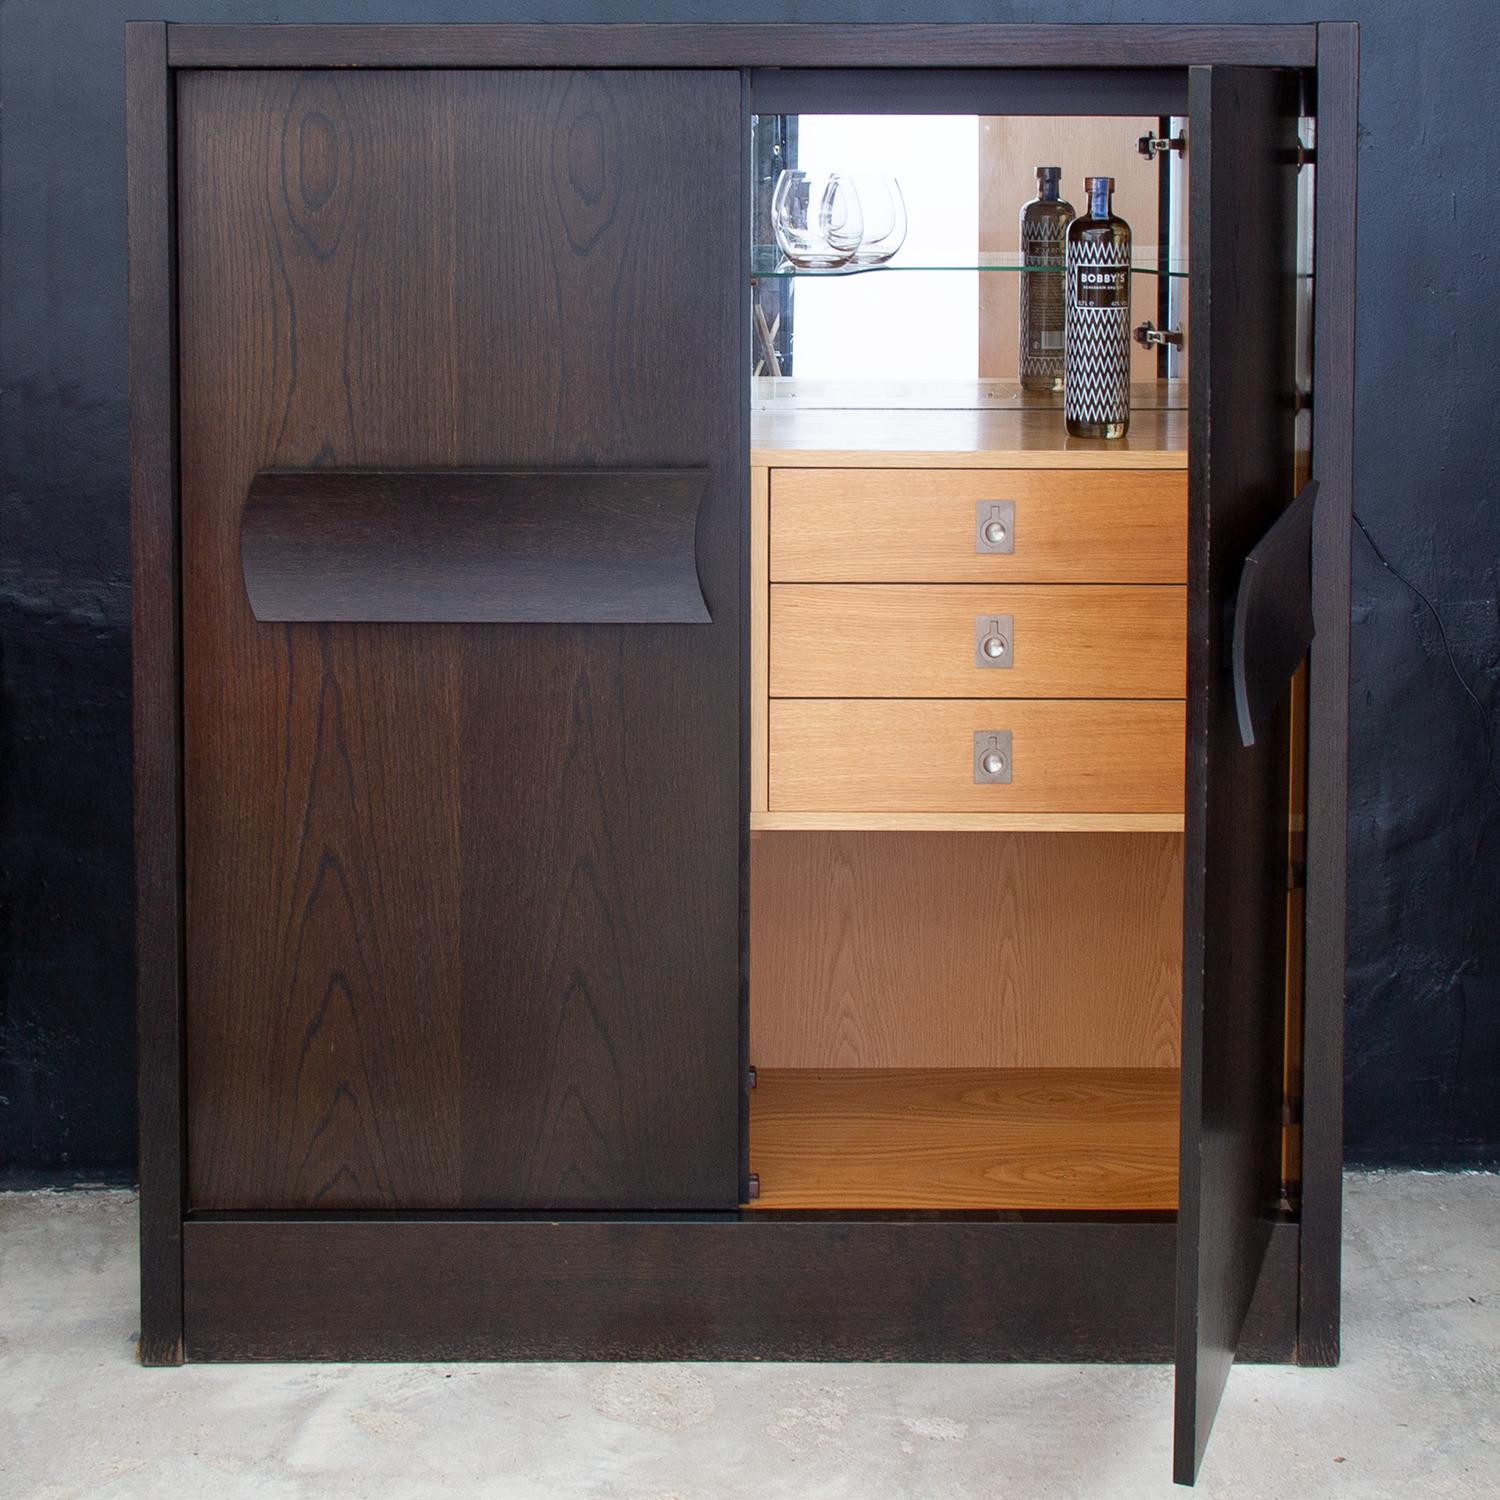 Hand-Crafted Brutalist Art Deco Bar Cabinet Refinished in Dark Brown Stained Oak